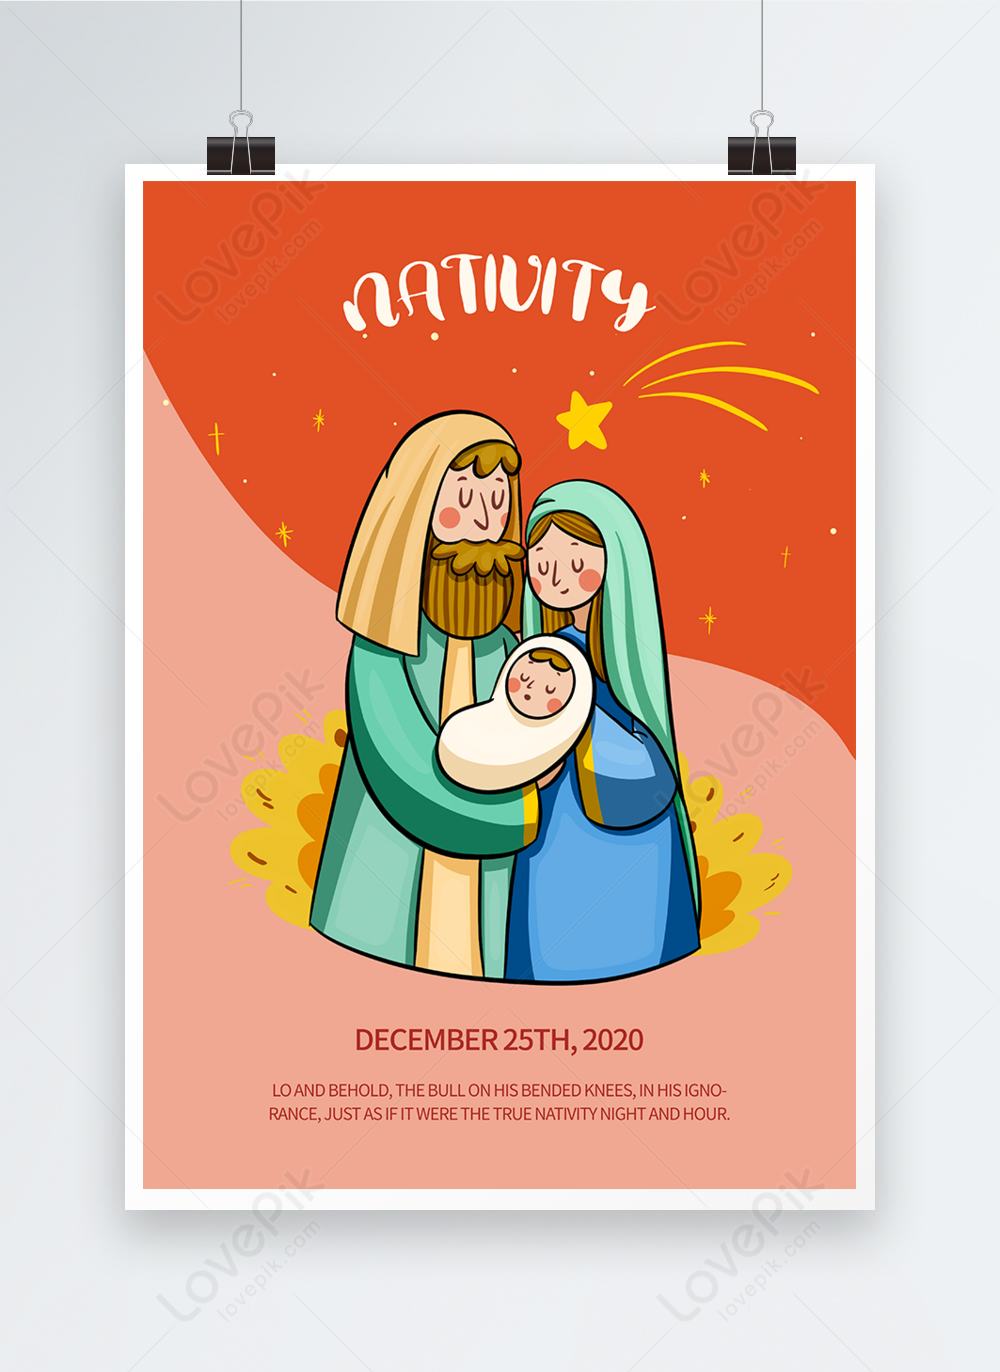 creative-red-hand-painted-character-illustration-style-nativity-of